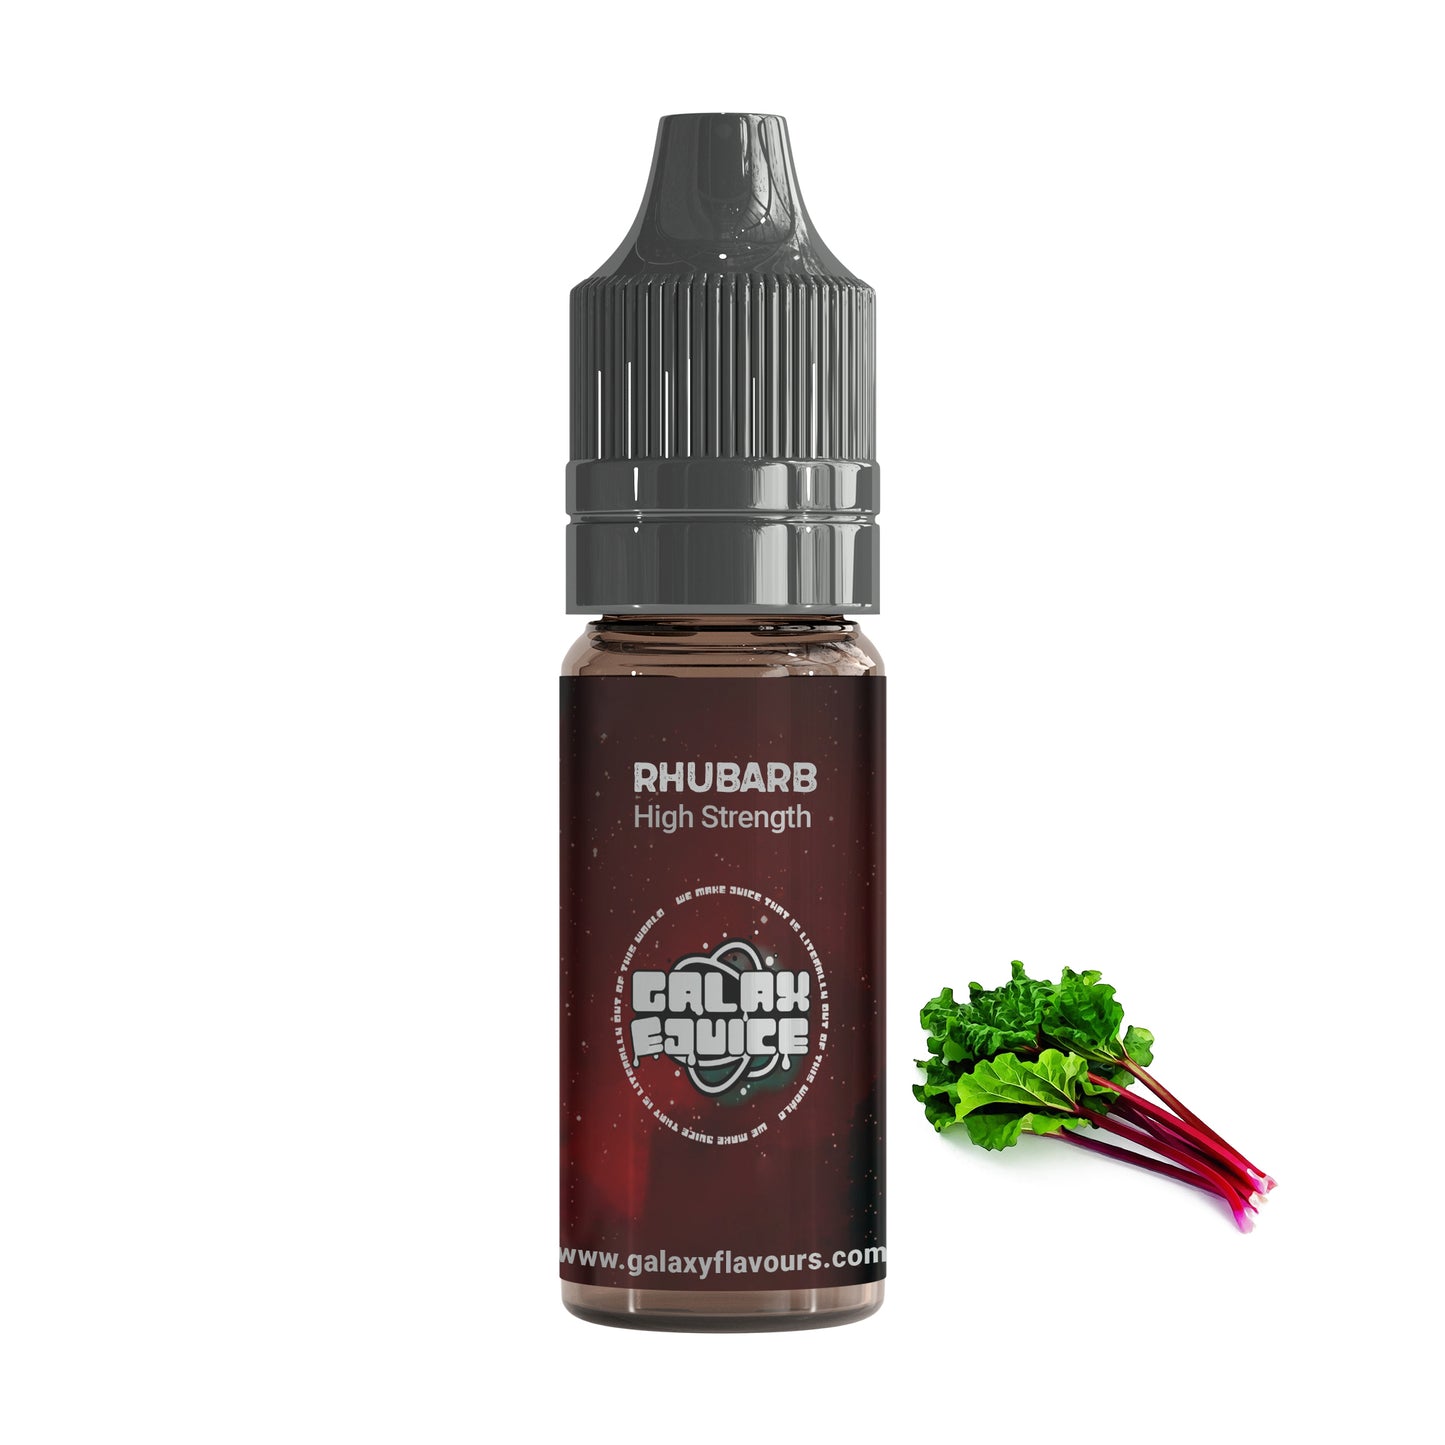 Rhubarb High Strength Professional Flavouring.